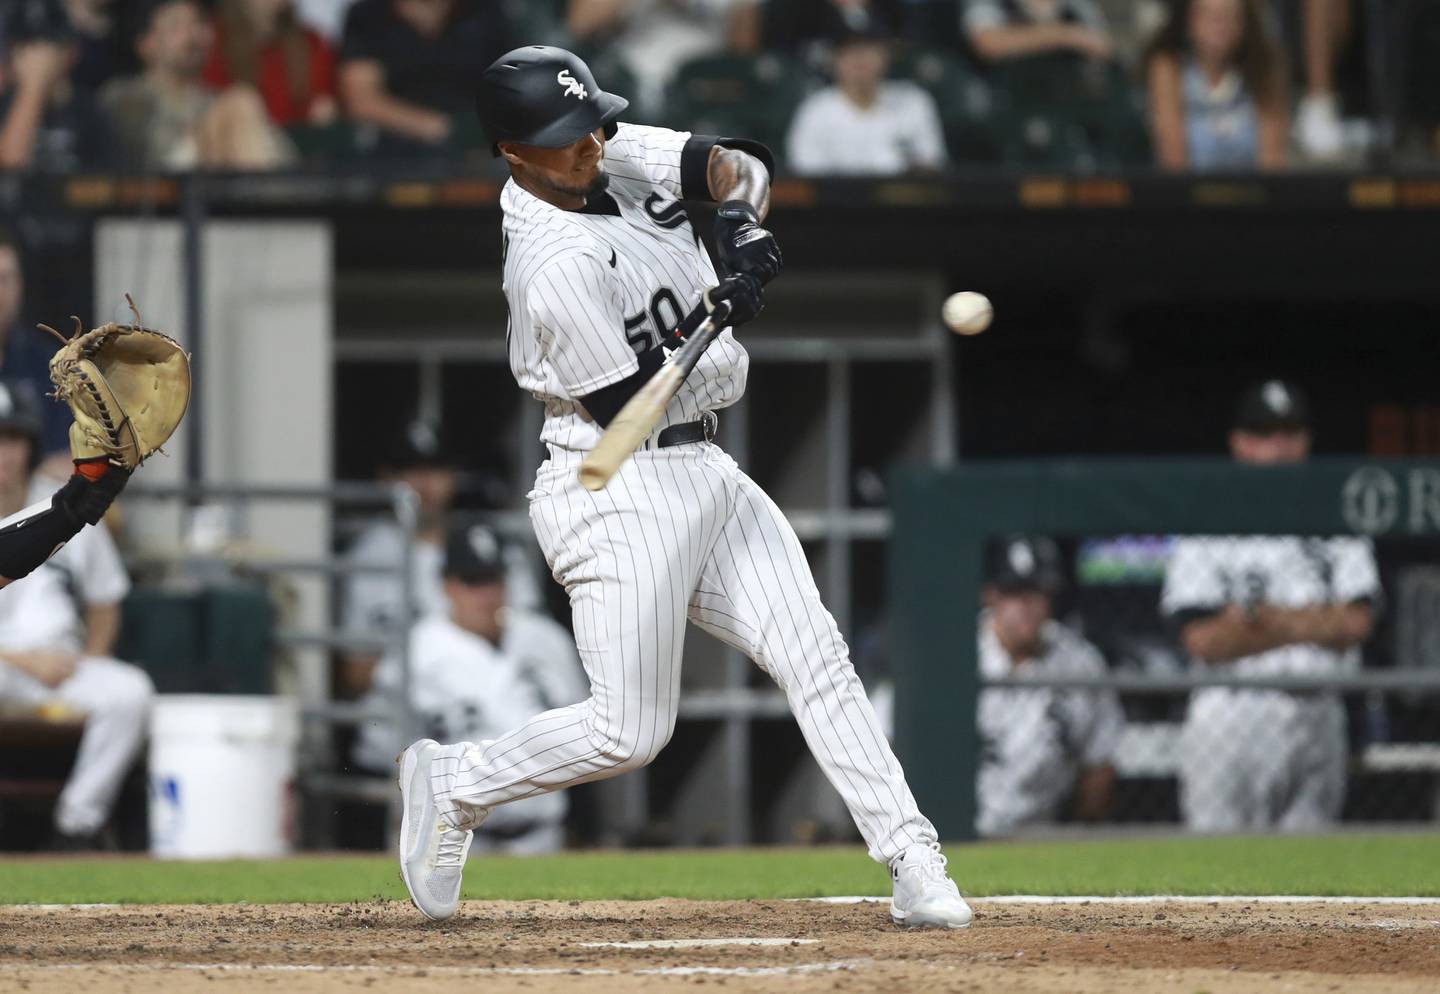 Lenyn Sosa bats against the Orioles on June 23, 2022, at Guaranteed Rate Field.